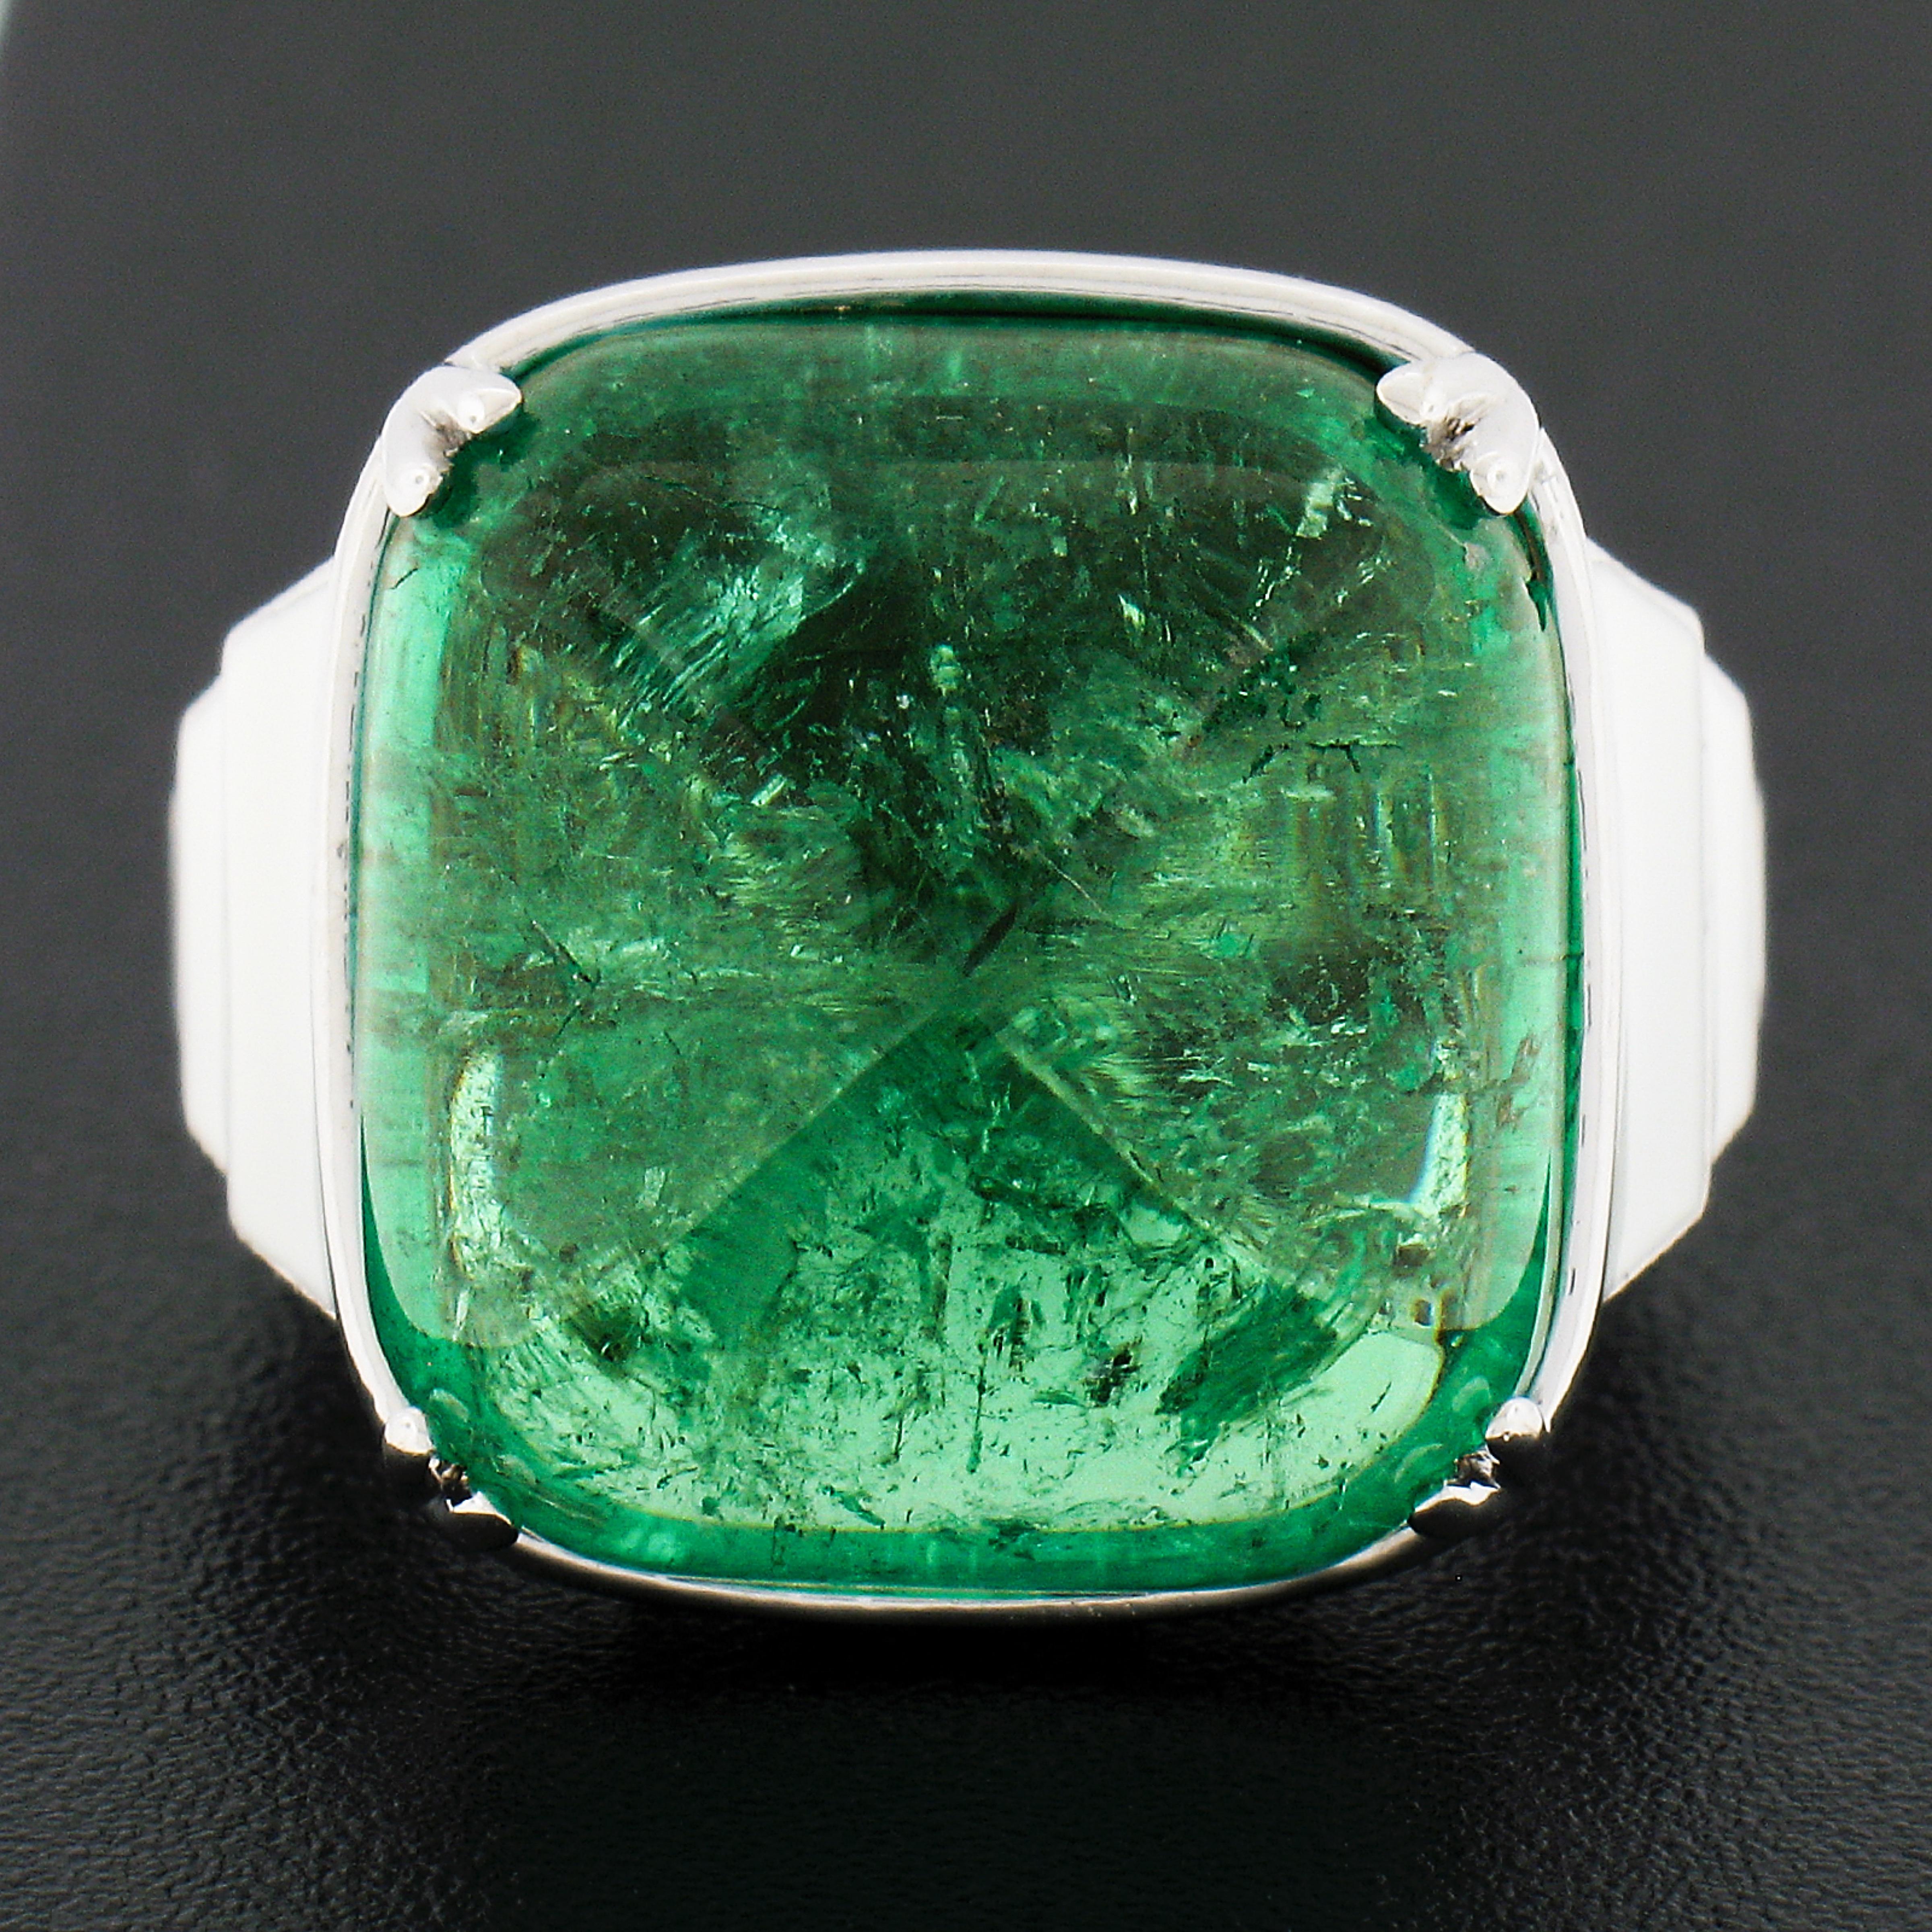 Here we have a gorgeous and uniquely designed cocktail ring that is crafted in solid 18k white gold. It features a large cushion sugarloaf cabochon cut natural emerald stone that is dual prong at its center. This approximaltey 23 carat, GIA